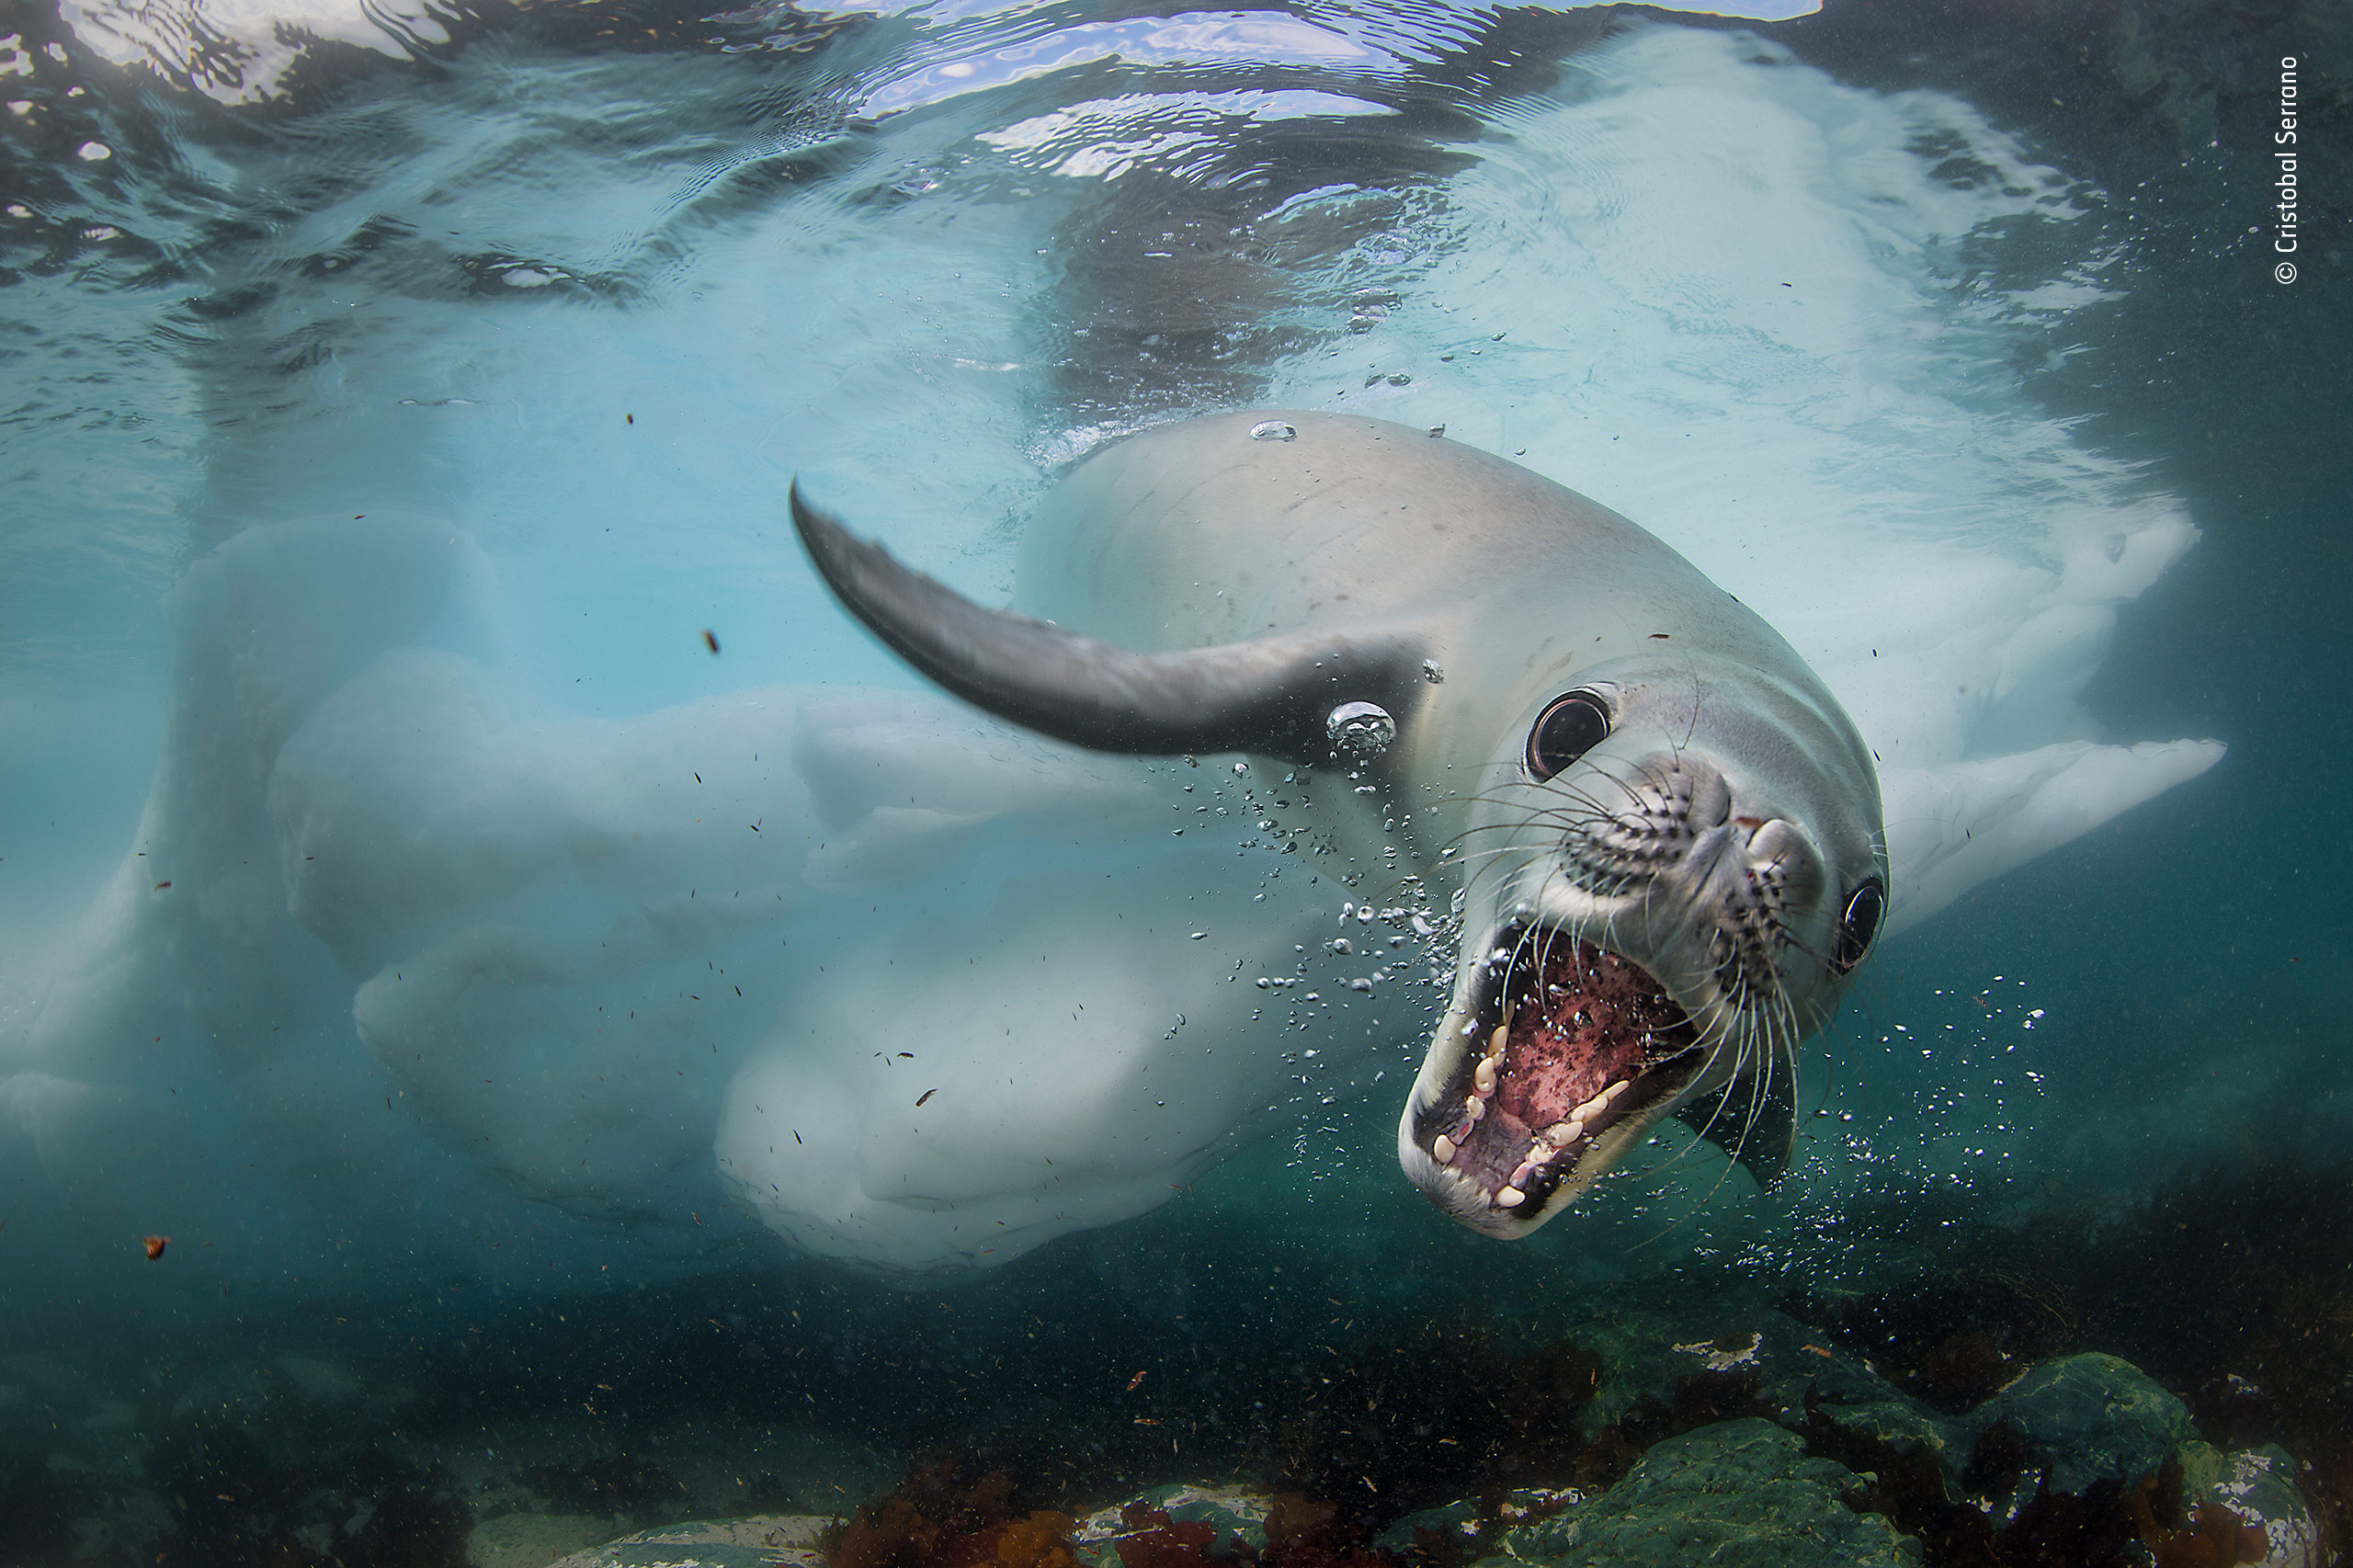 A seal lunges towards the camera